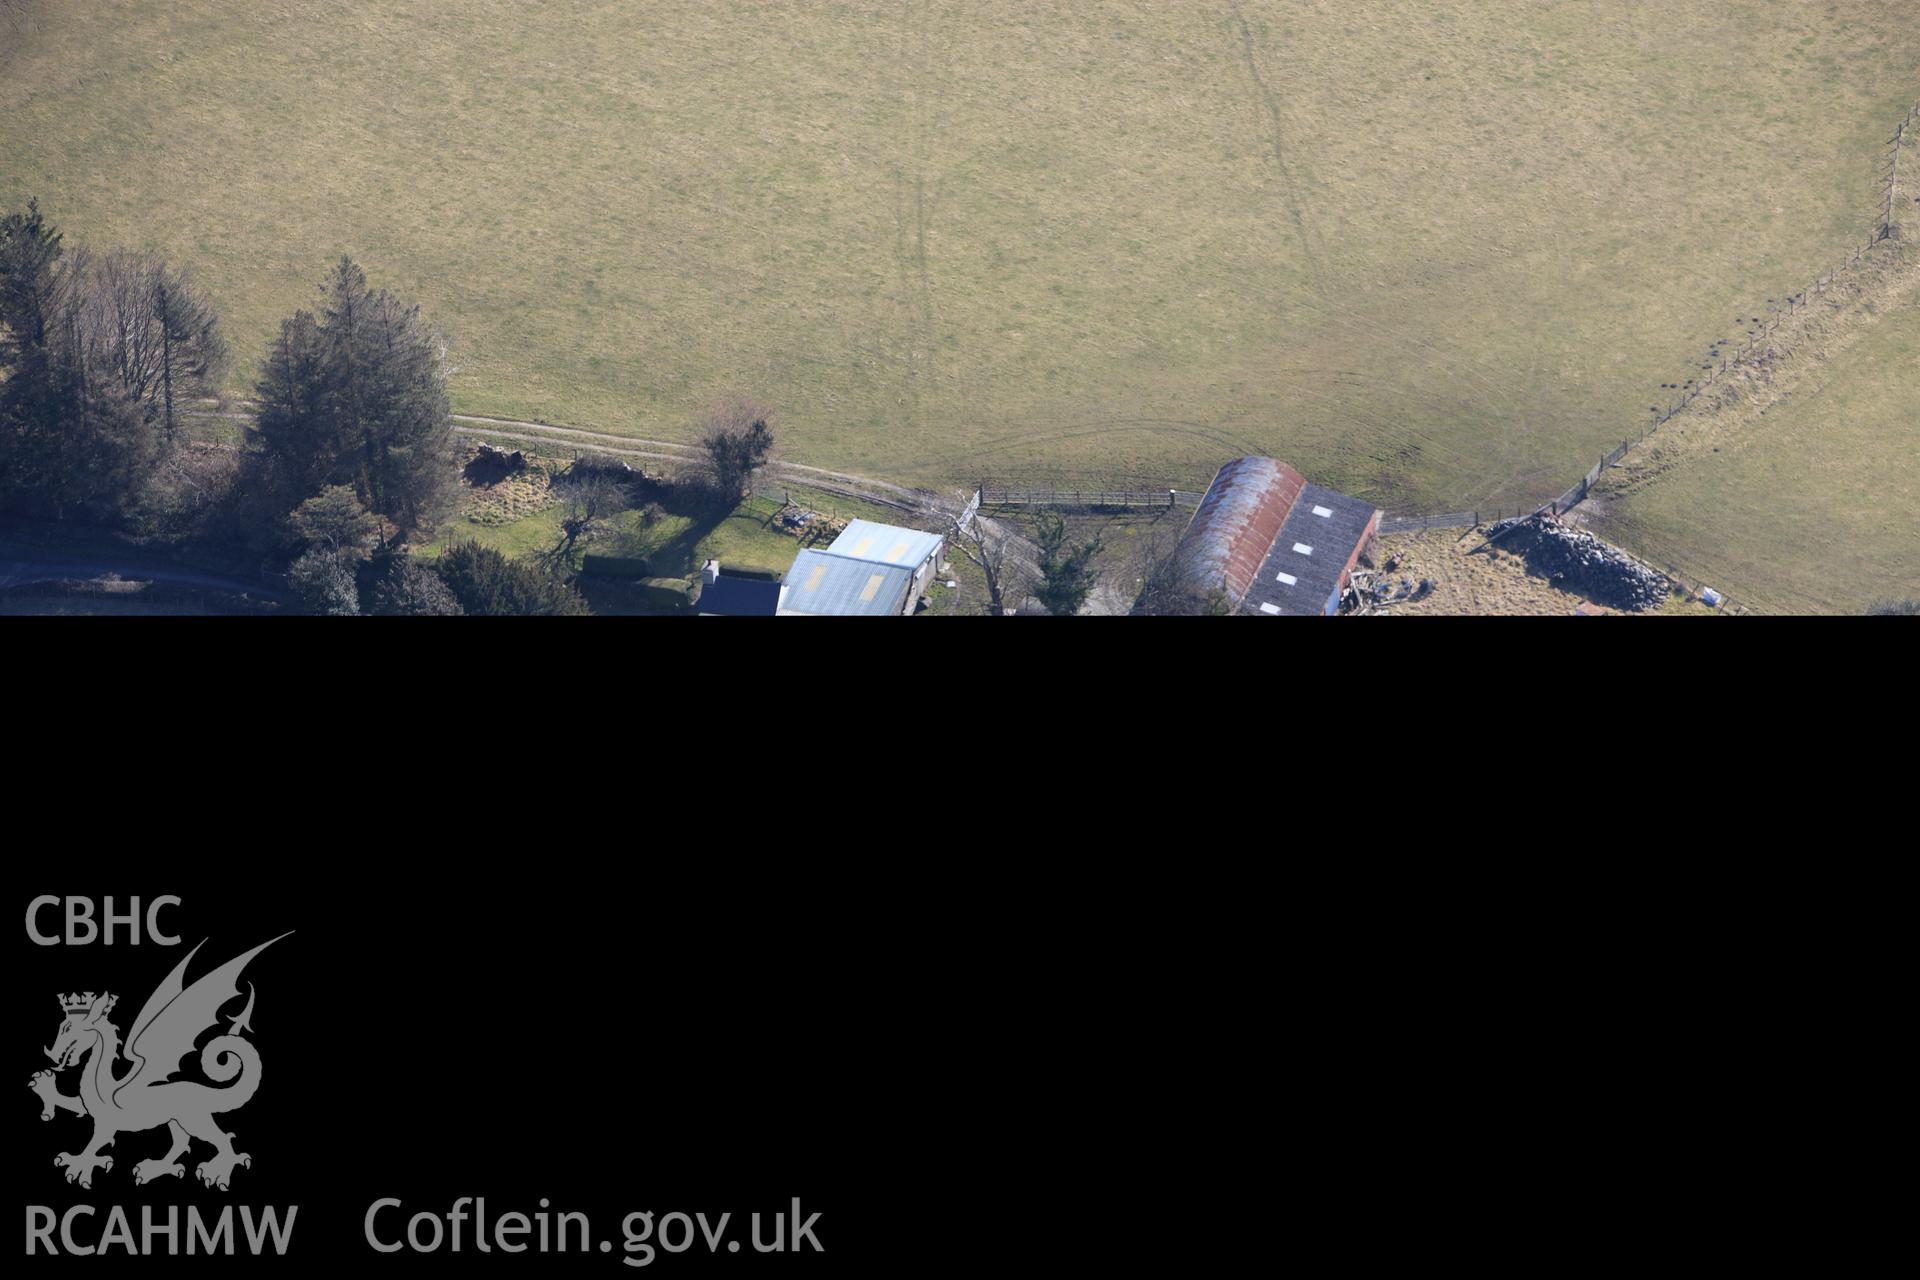 RCAHMW colour oblique photograph of Cefn Caer farm. Taken by Toby Driver on 08/03/2010.